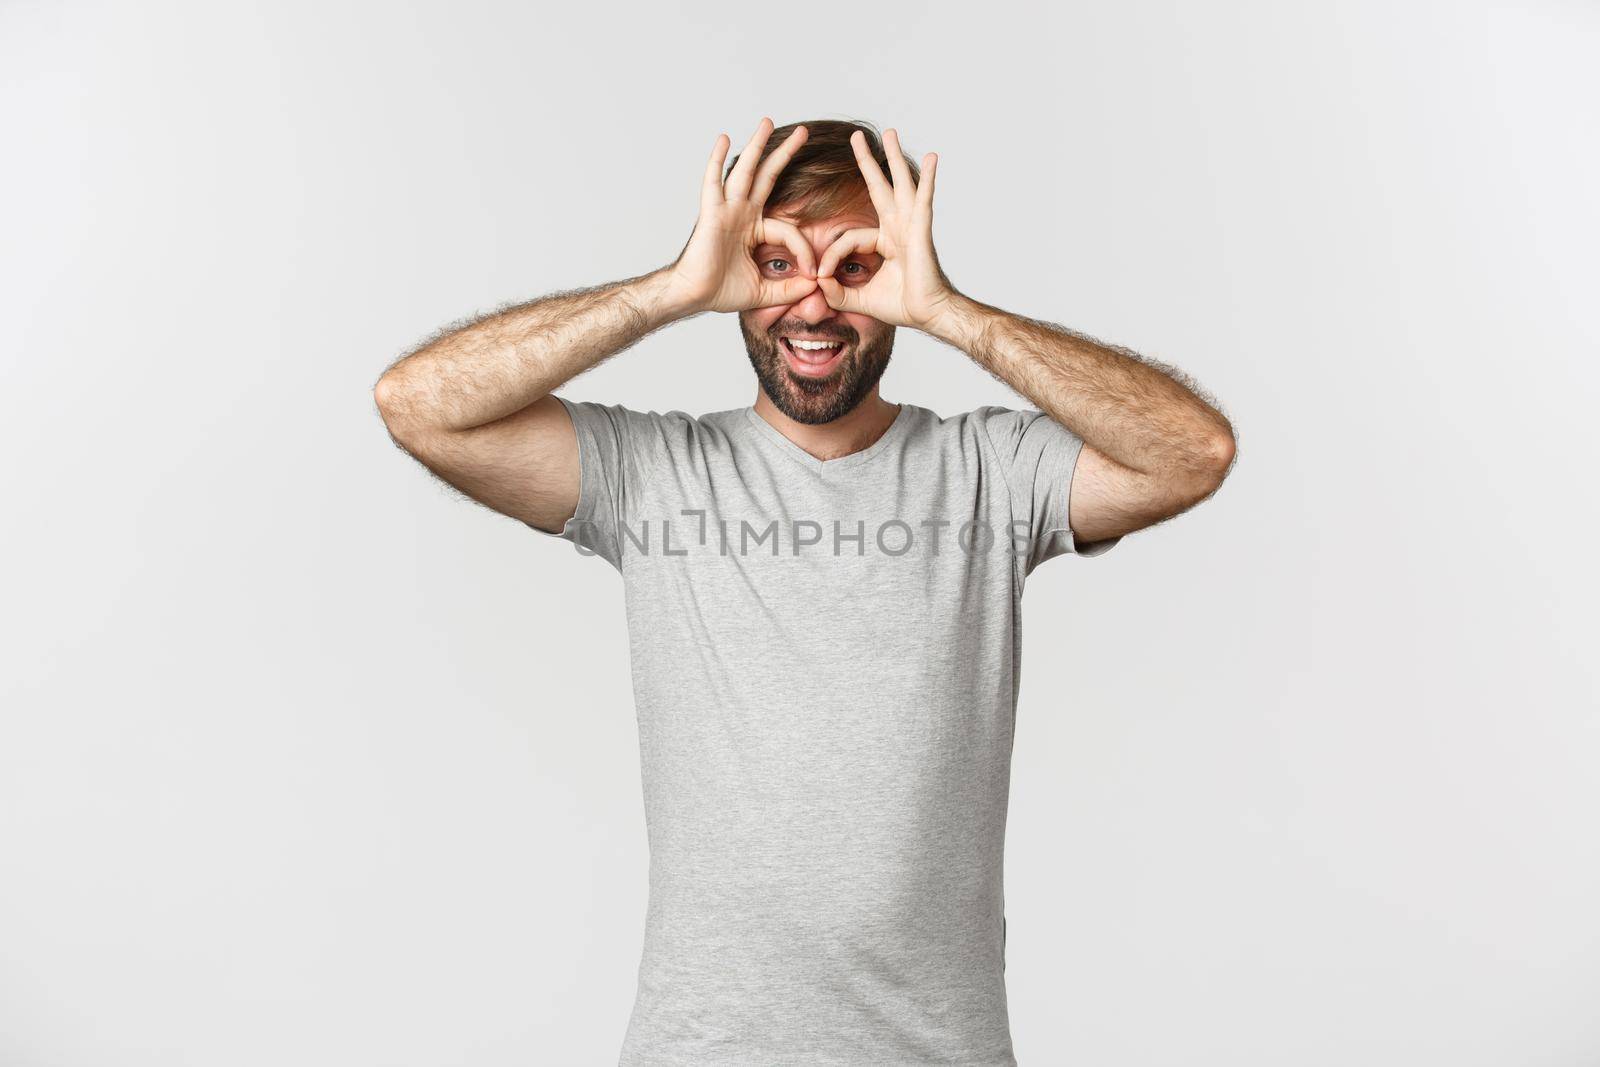 Portrait of funny caucasian guy making faces and mocking someone, standing over white background.